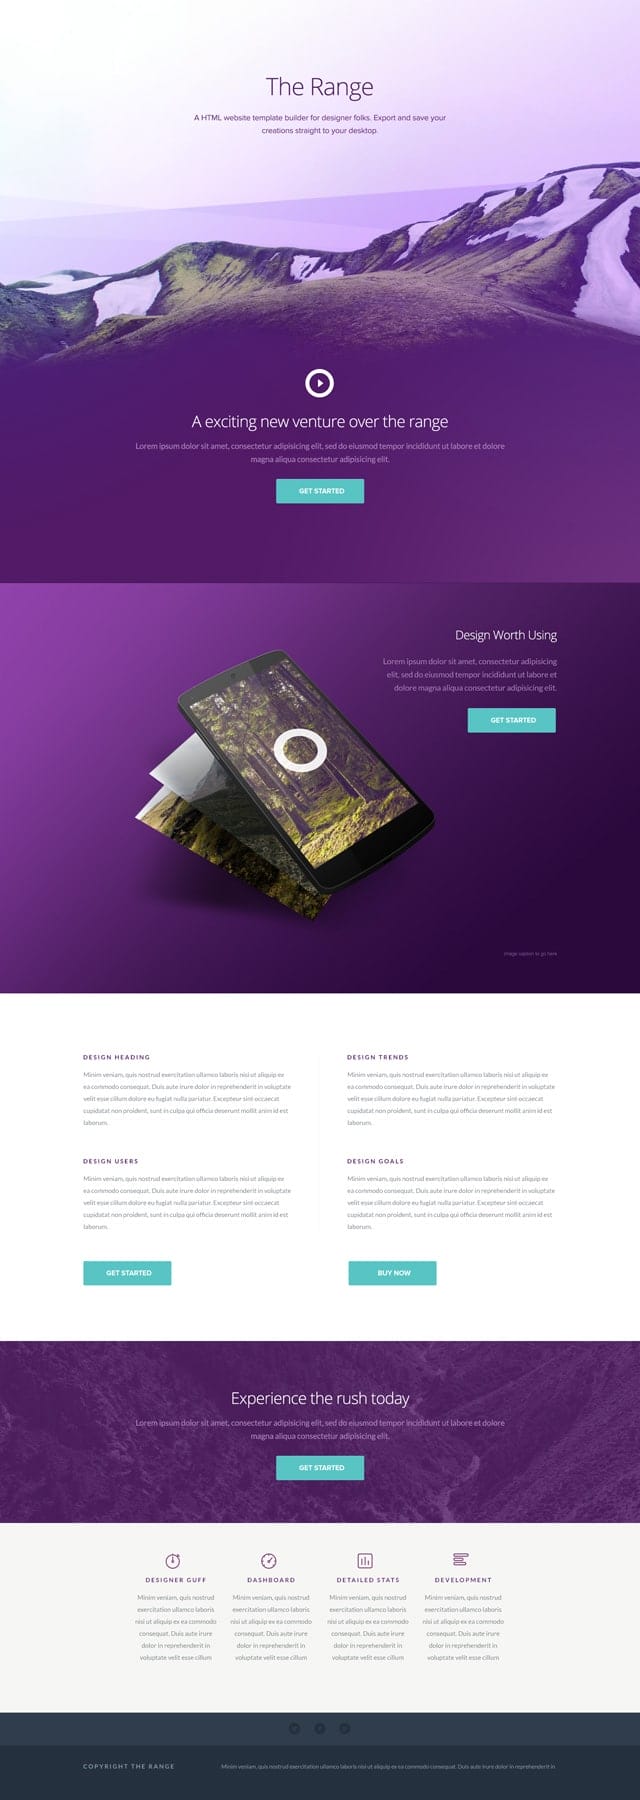 The Range Single Pager Website Template PSD